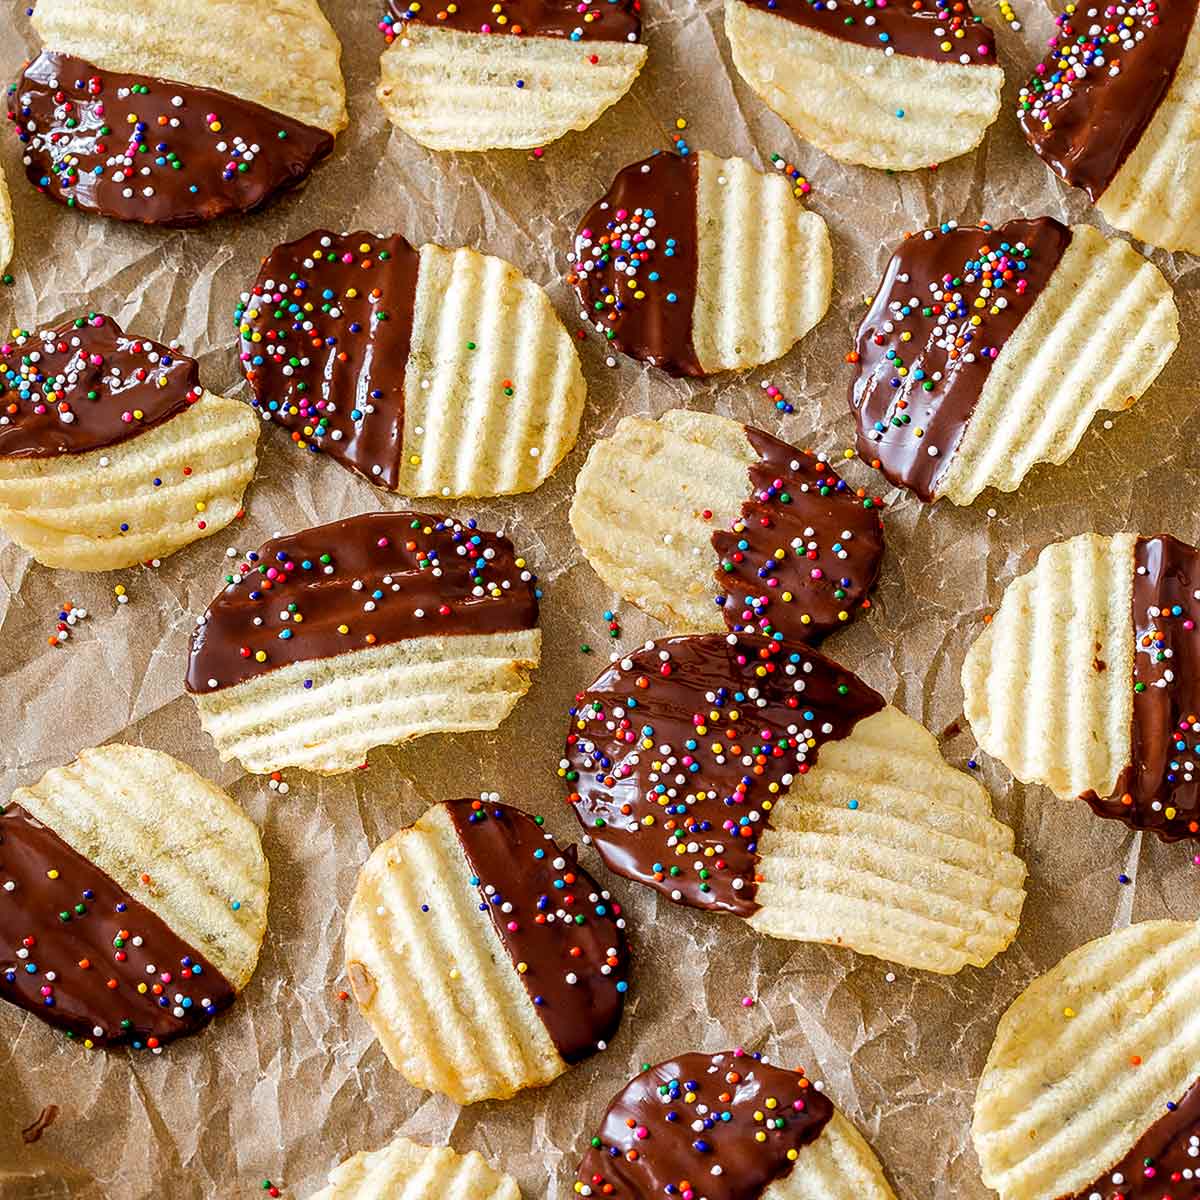 Chocolate covered potato chips with sprinkles on the chocolate in a single layer on a parchment-lined baking sheet.